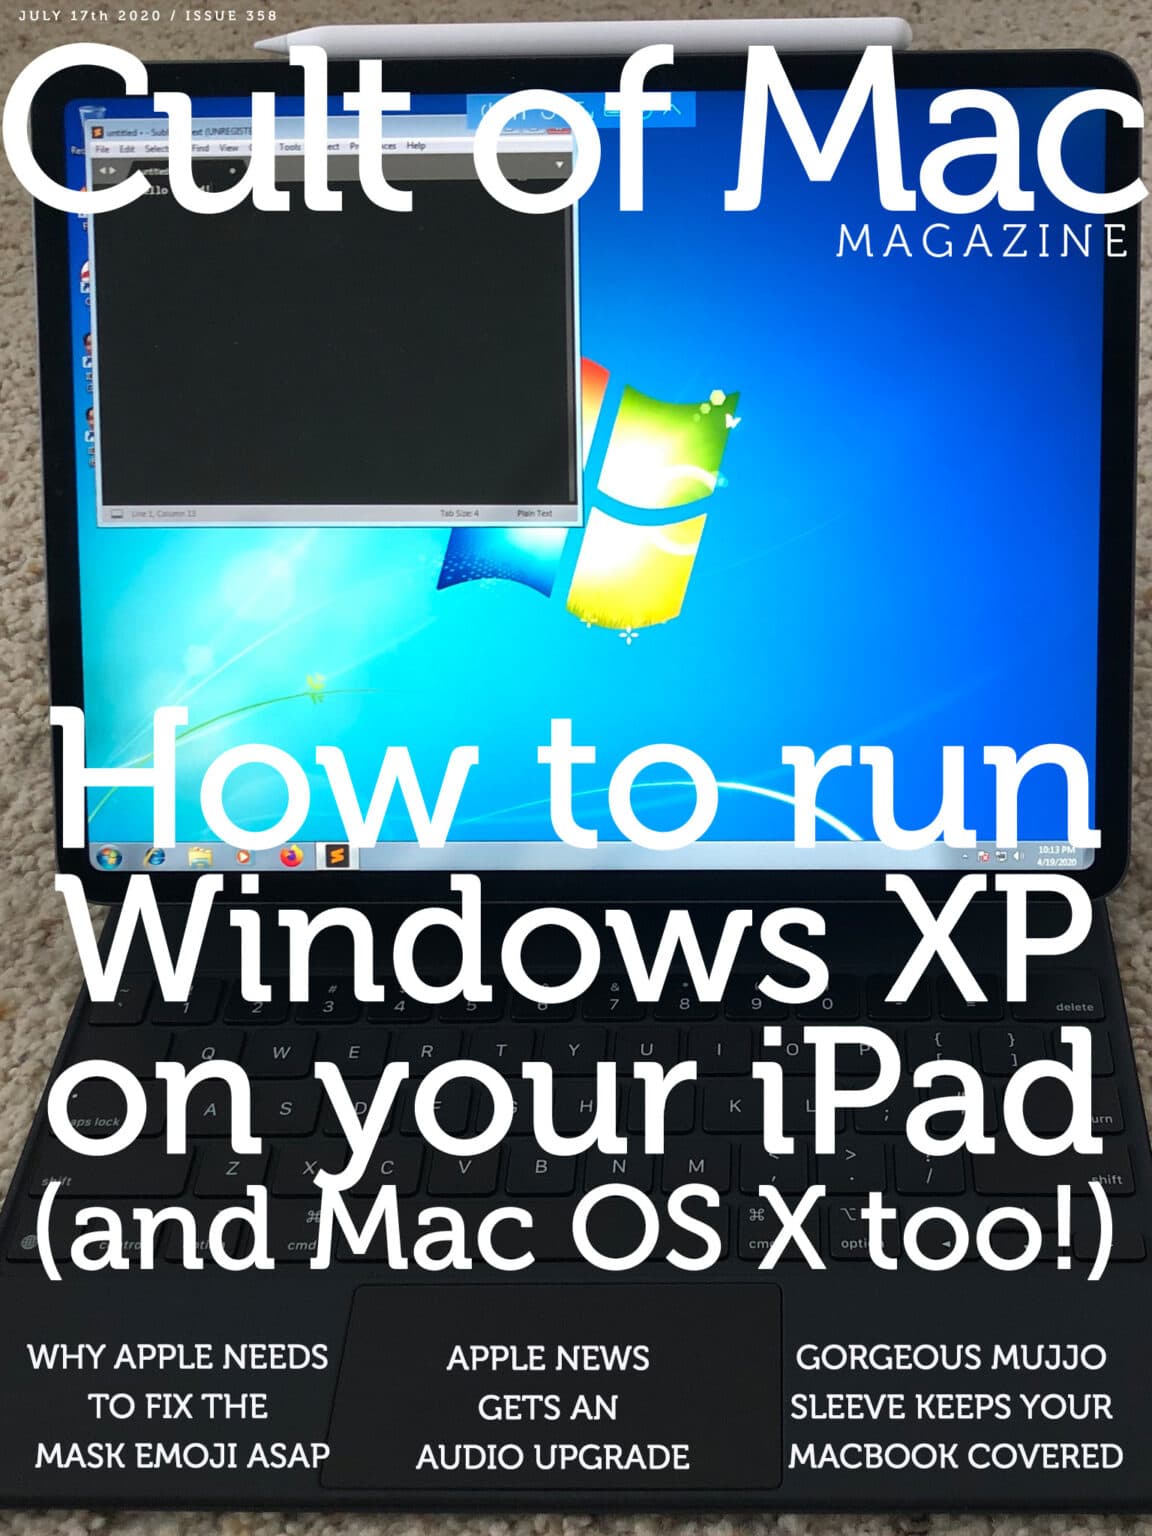 It's actually fairly simple to get Mac OS X or Windows XP running on an iPhone or iPad.